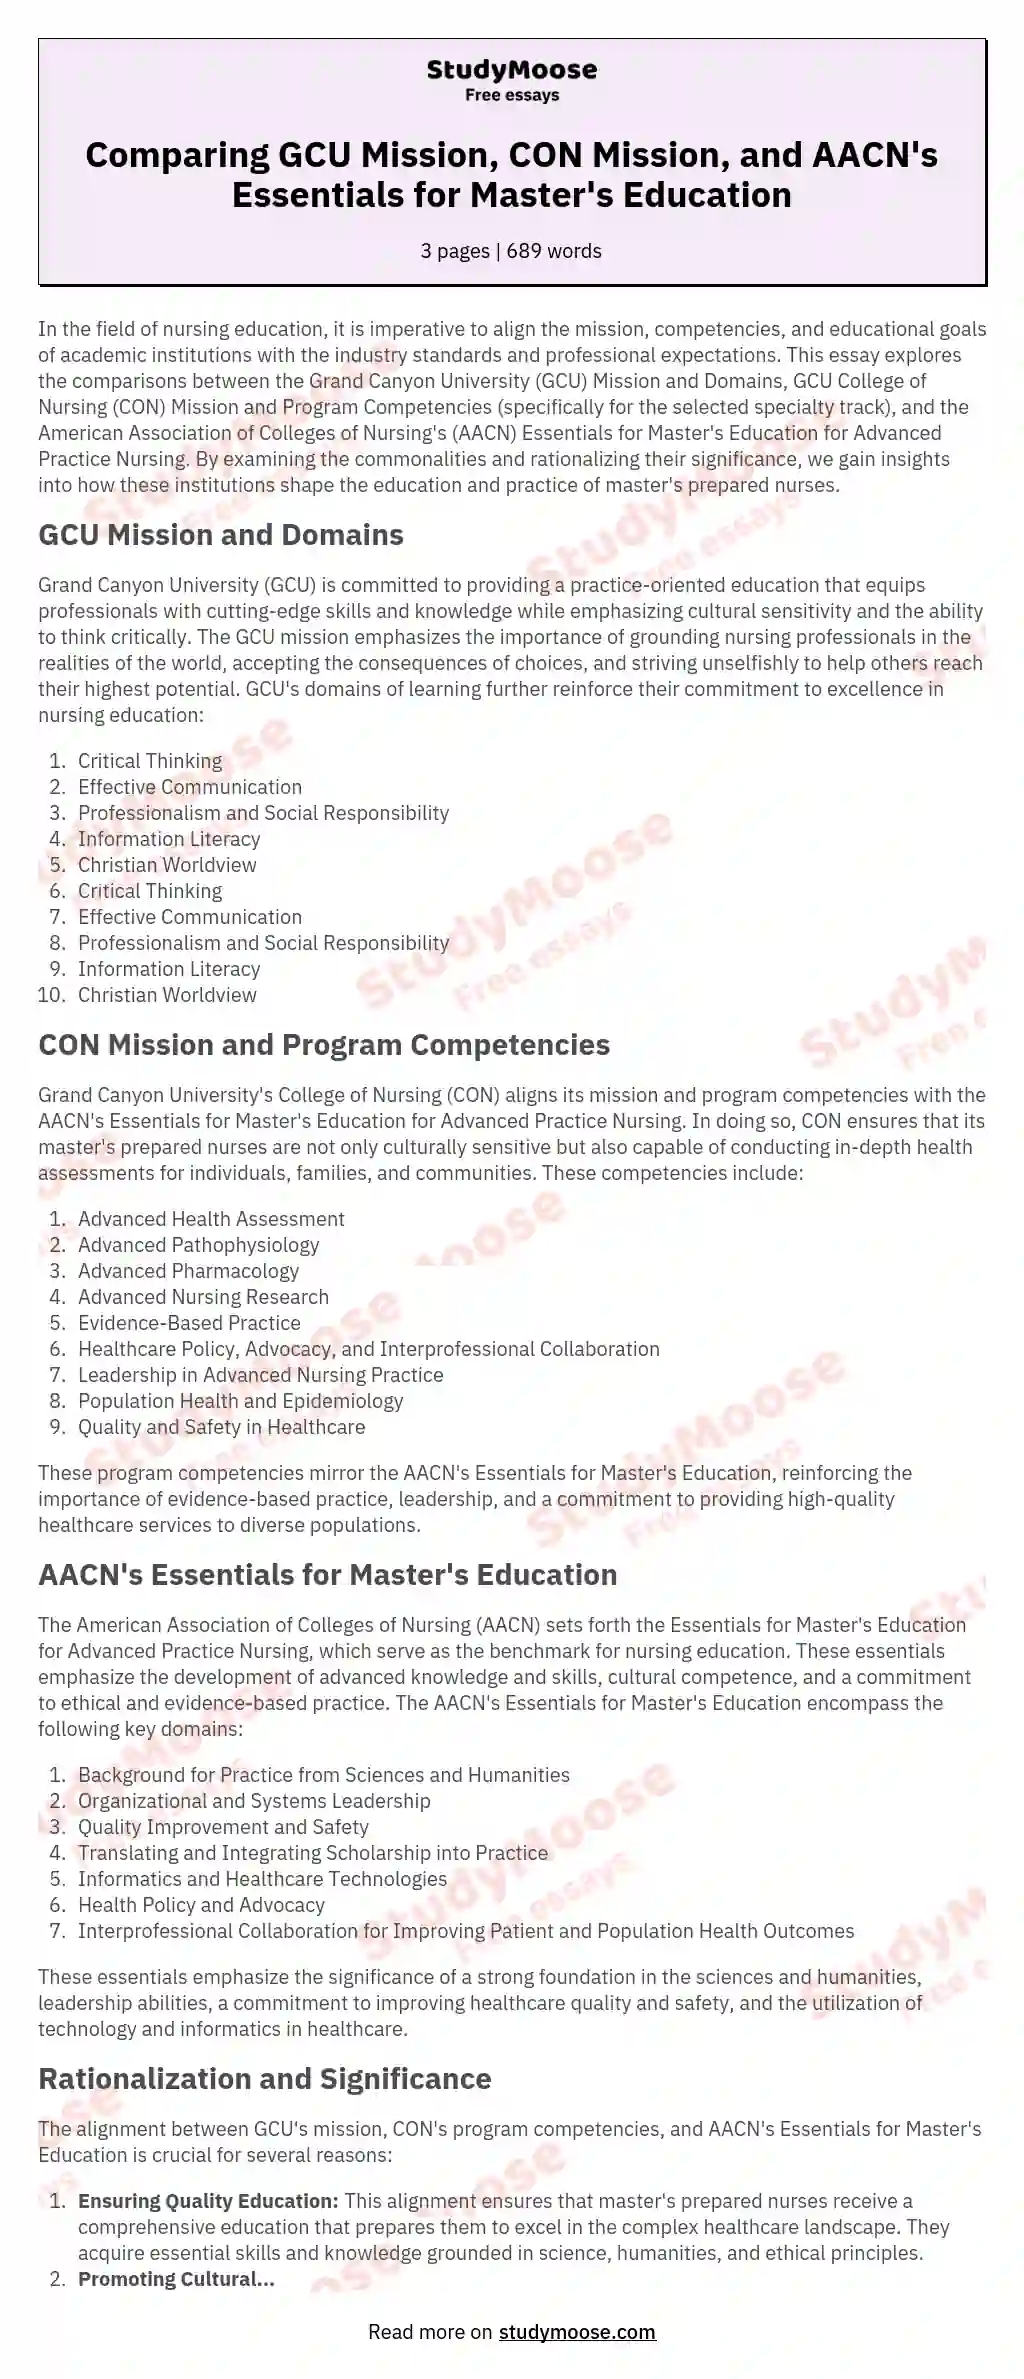 Comparing GCU Mission, CON Mission, and AACN's Essentials for Master's Education essay